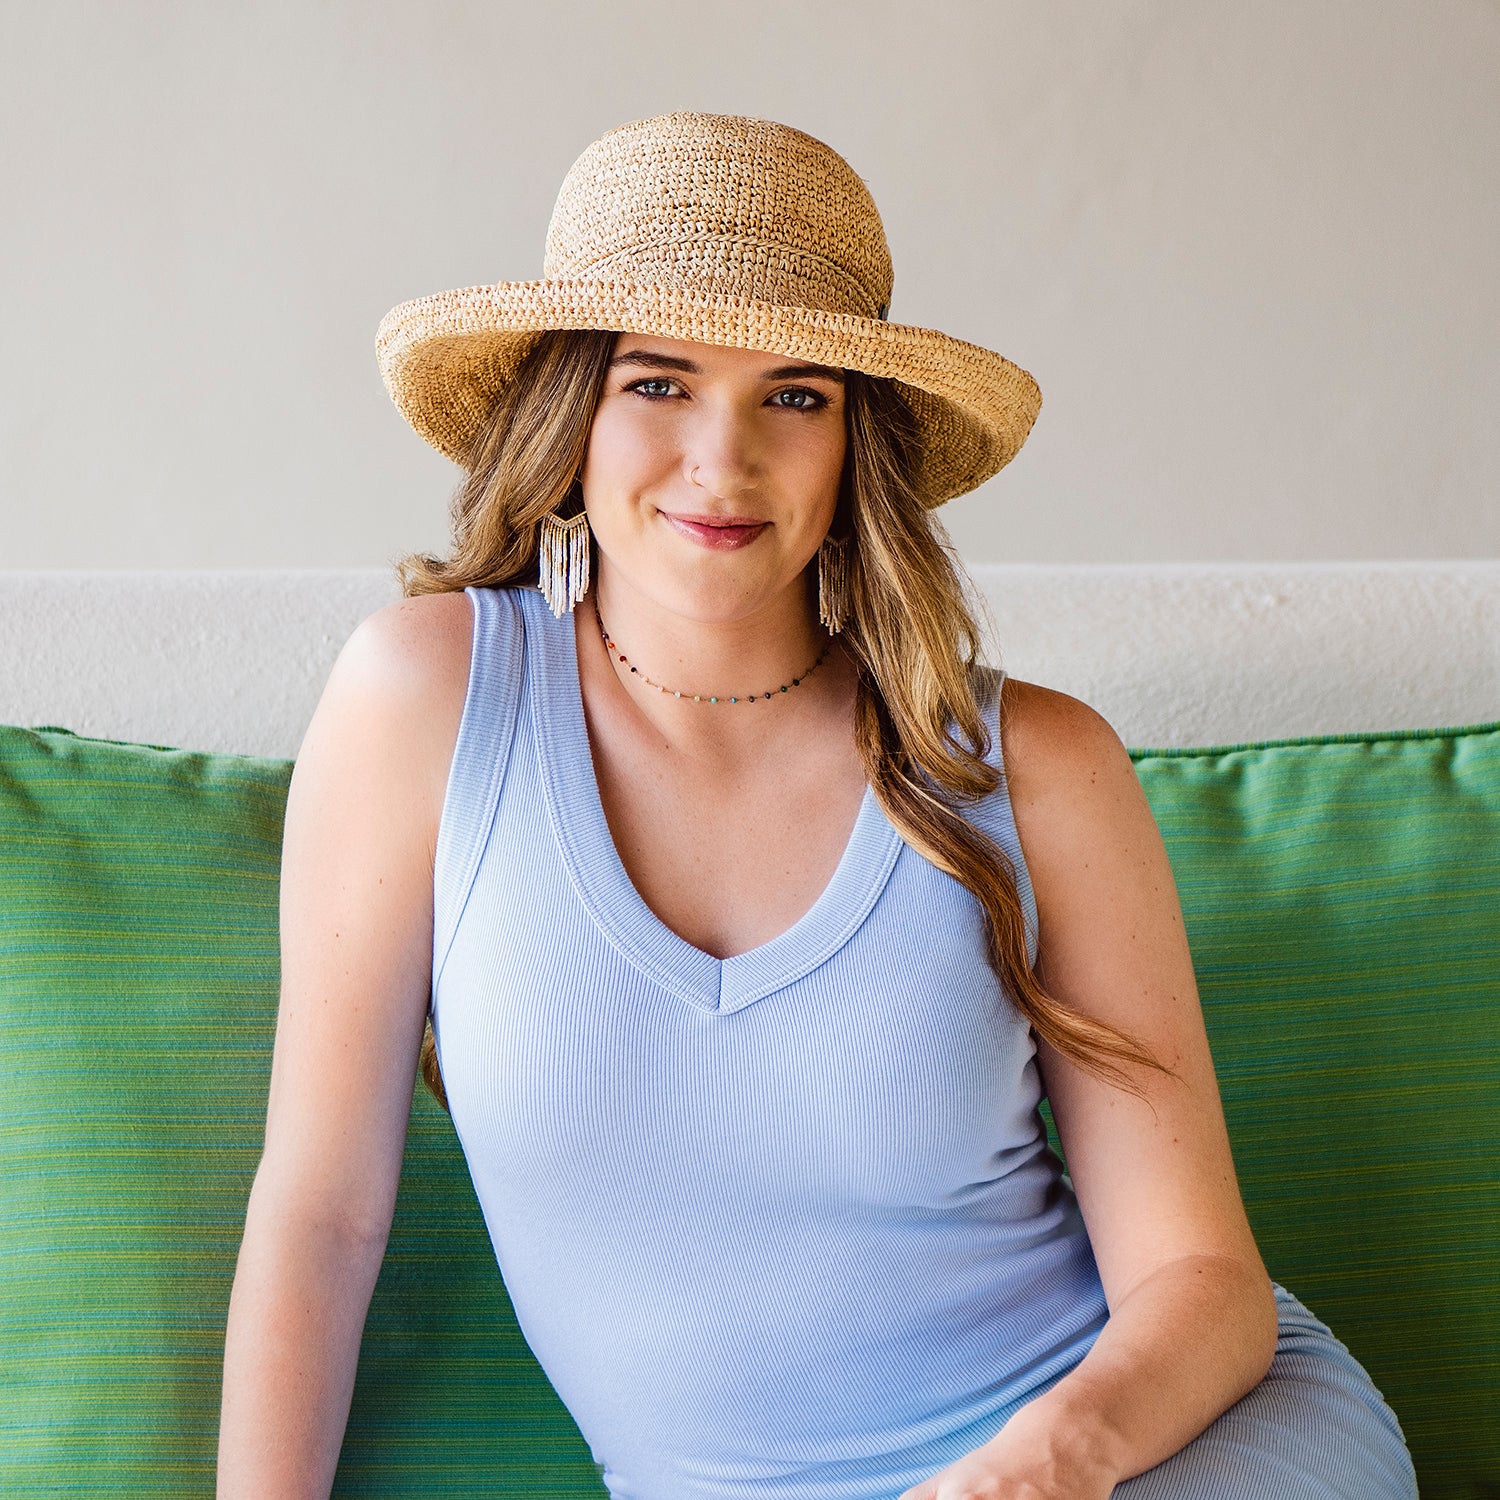 Woman Wearing a Petite Catalina Straw Beach Hat while sitting